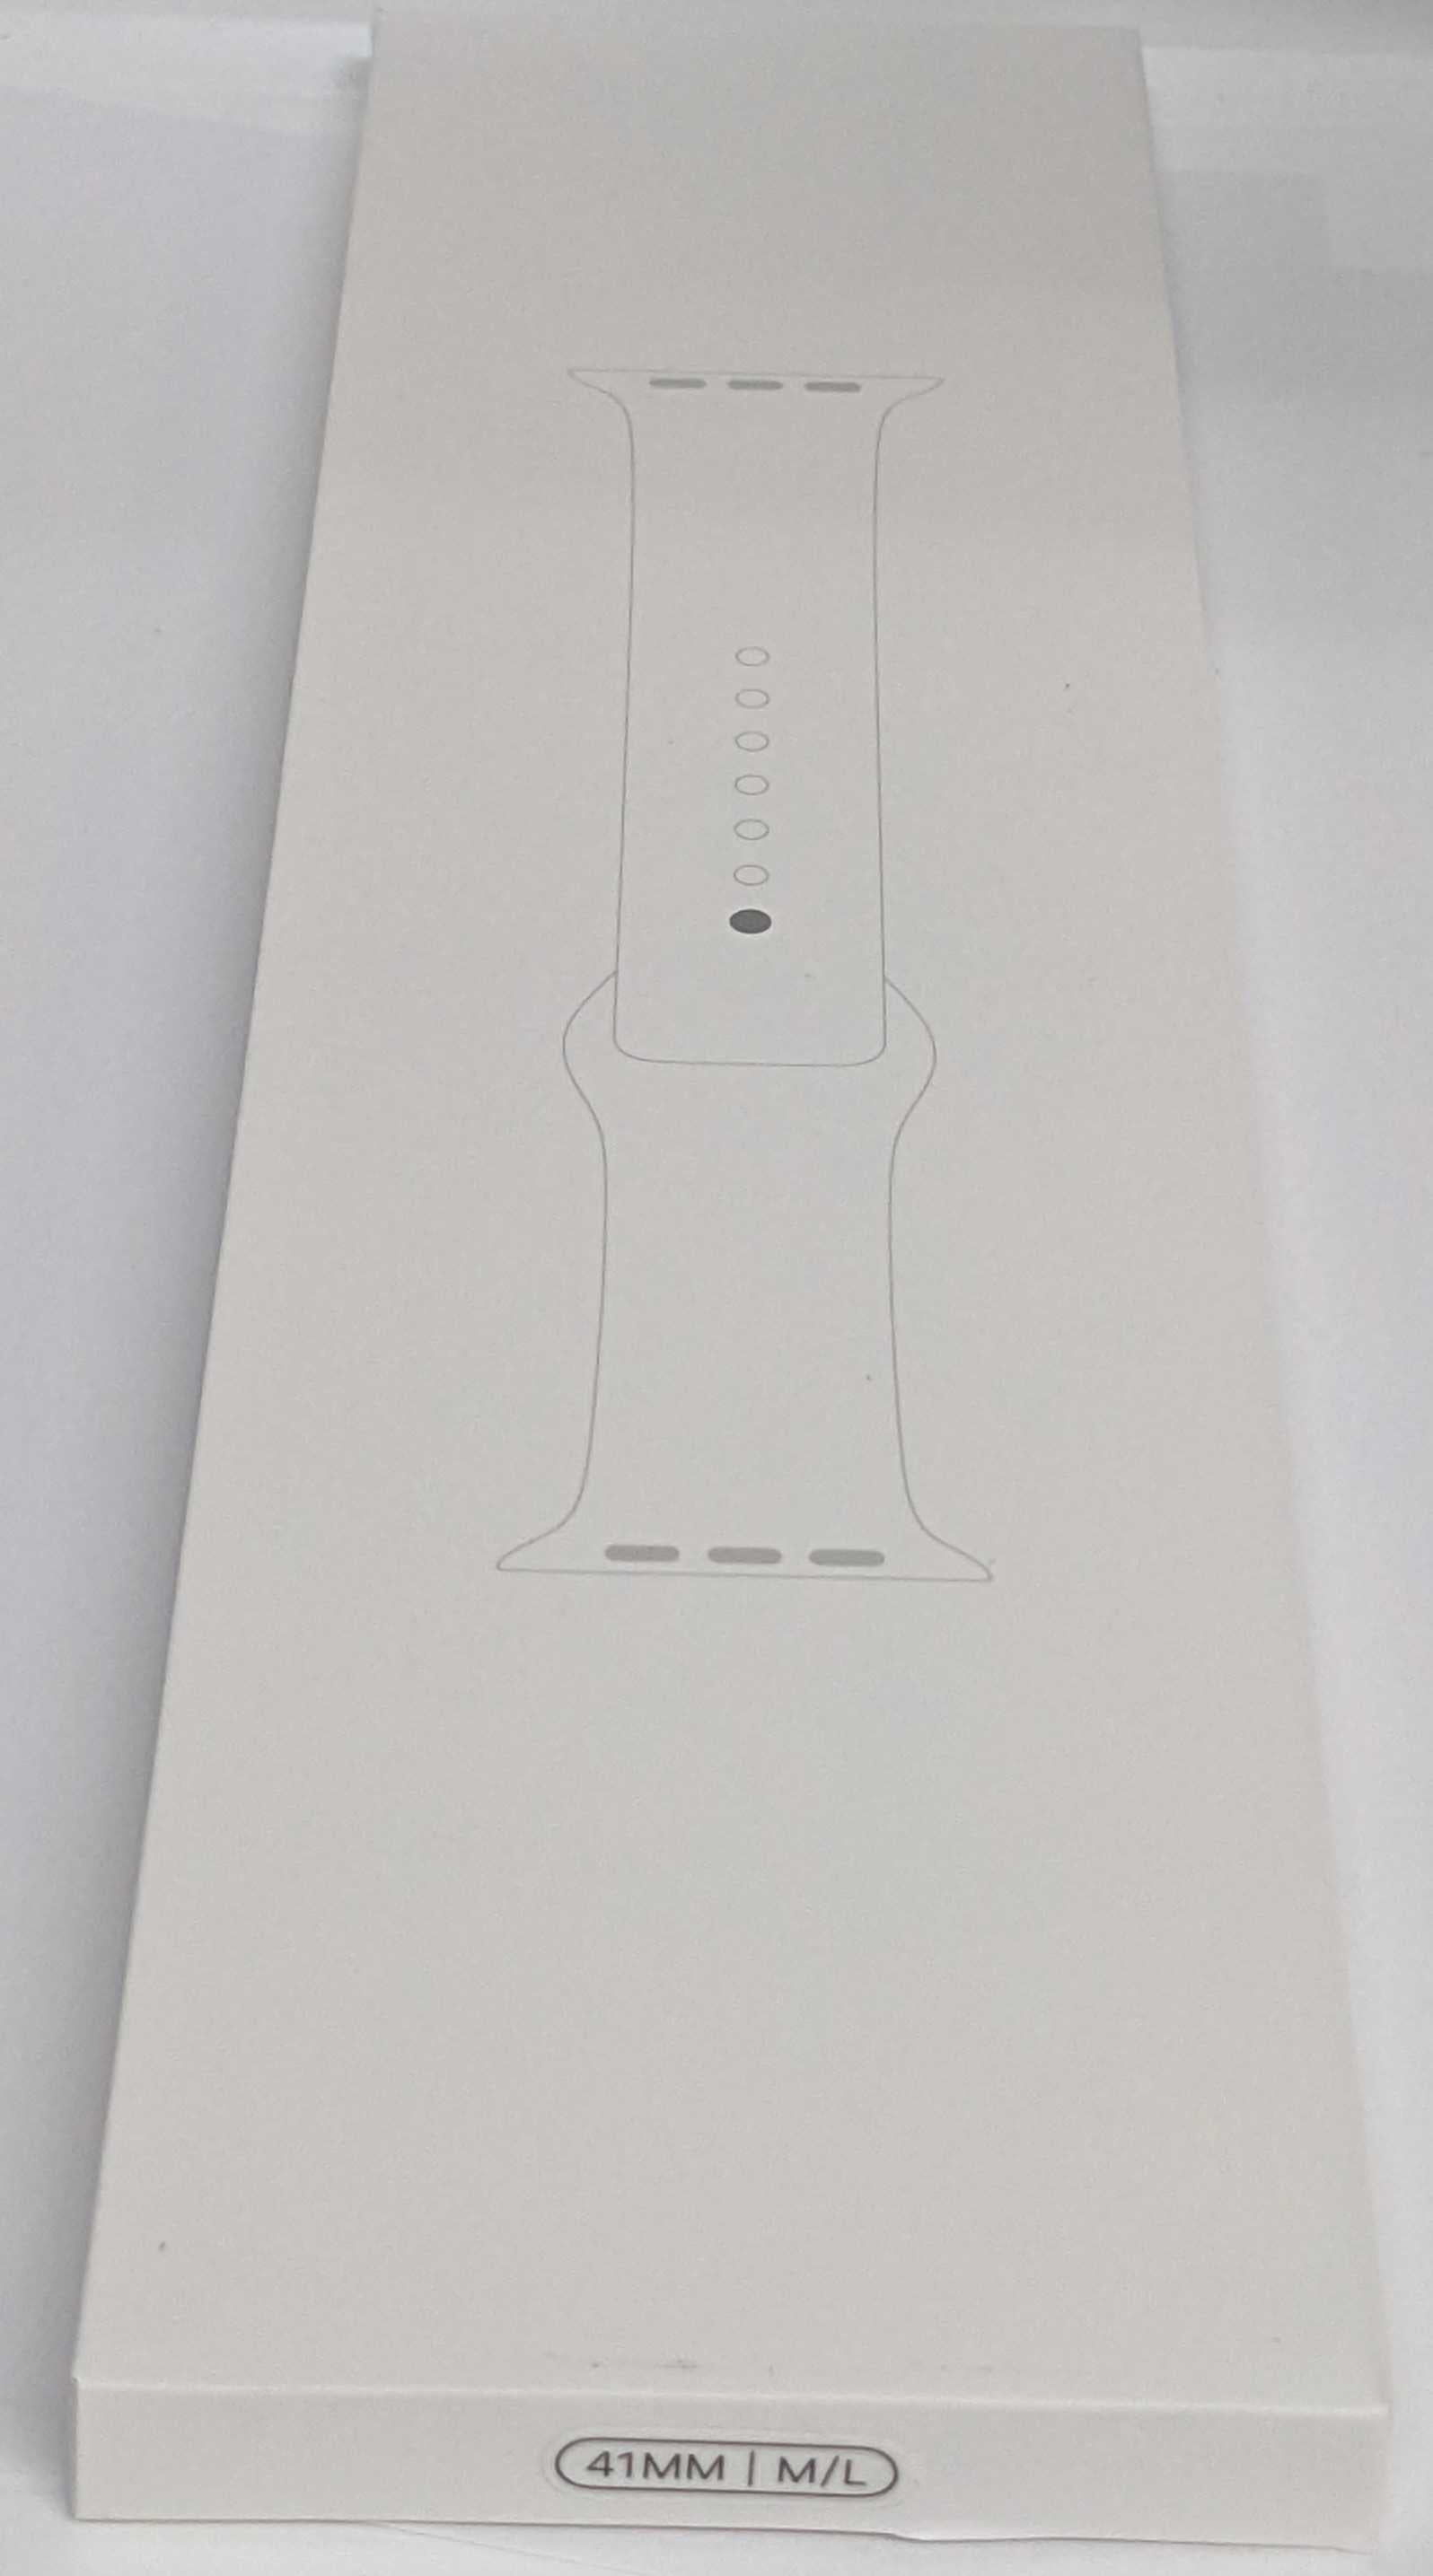 White wrists) Genuine 150-200mm Watch (41mm) -M/L(Fits - Band Sport Band Apple